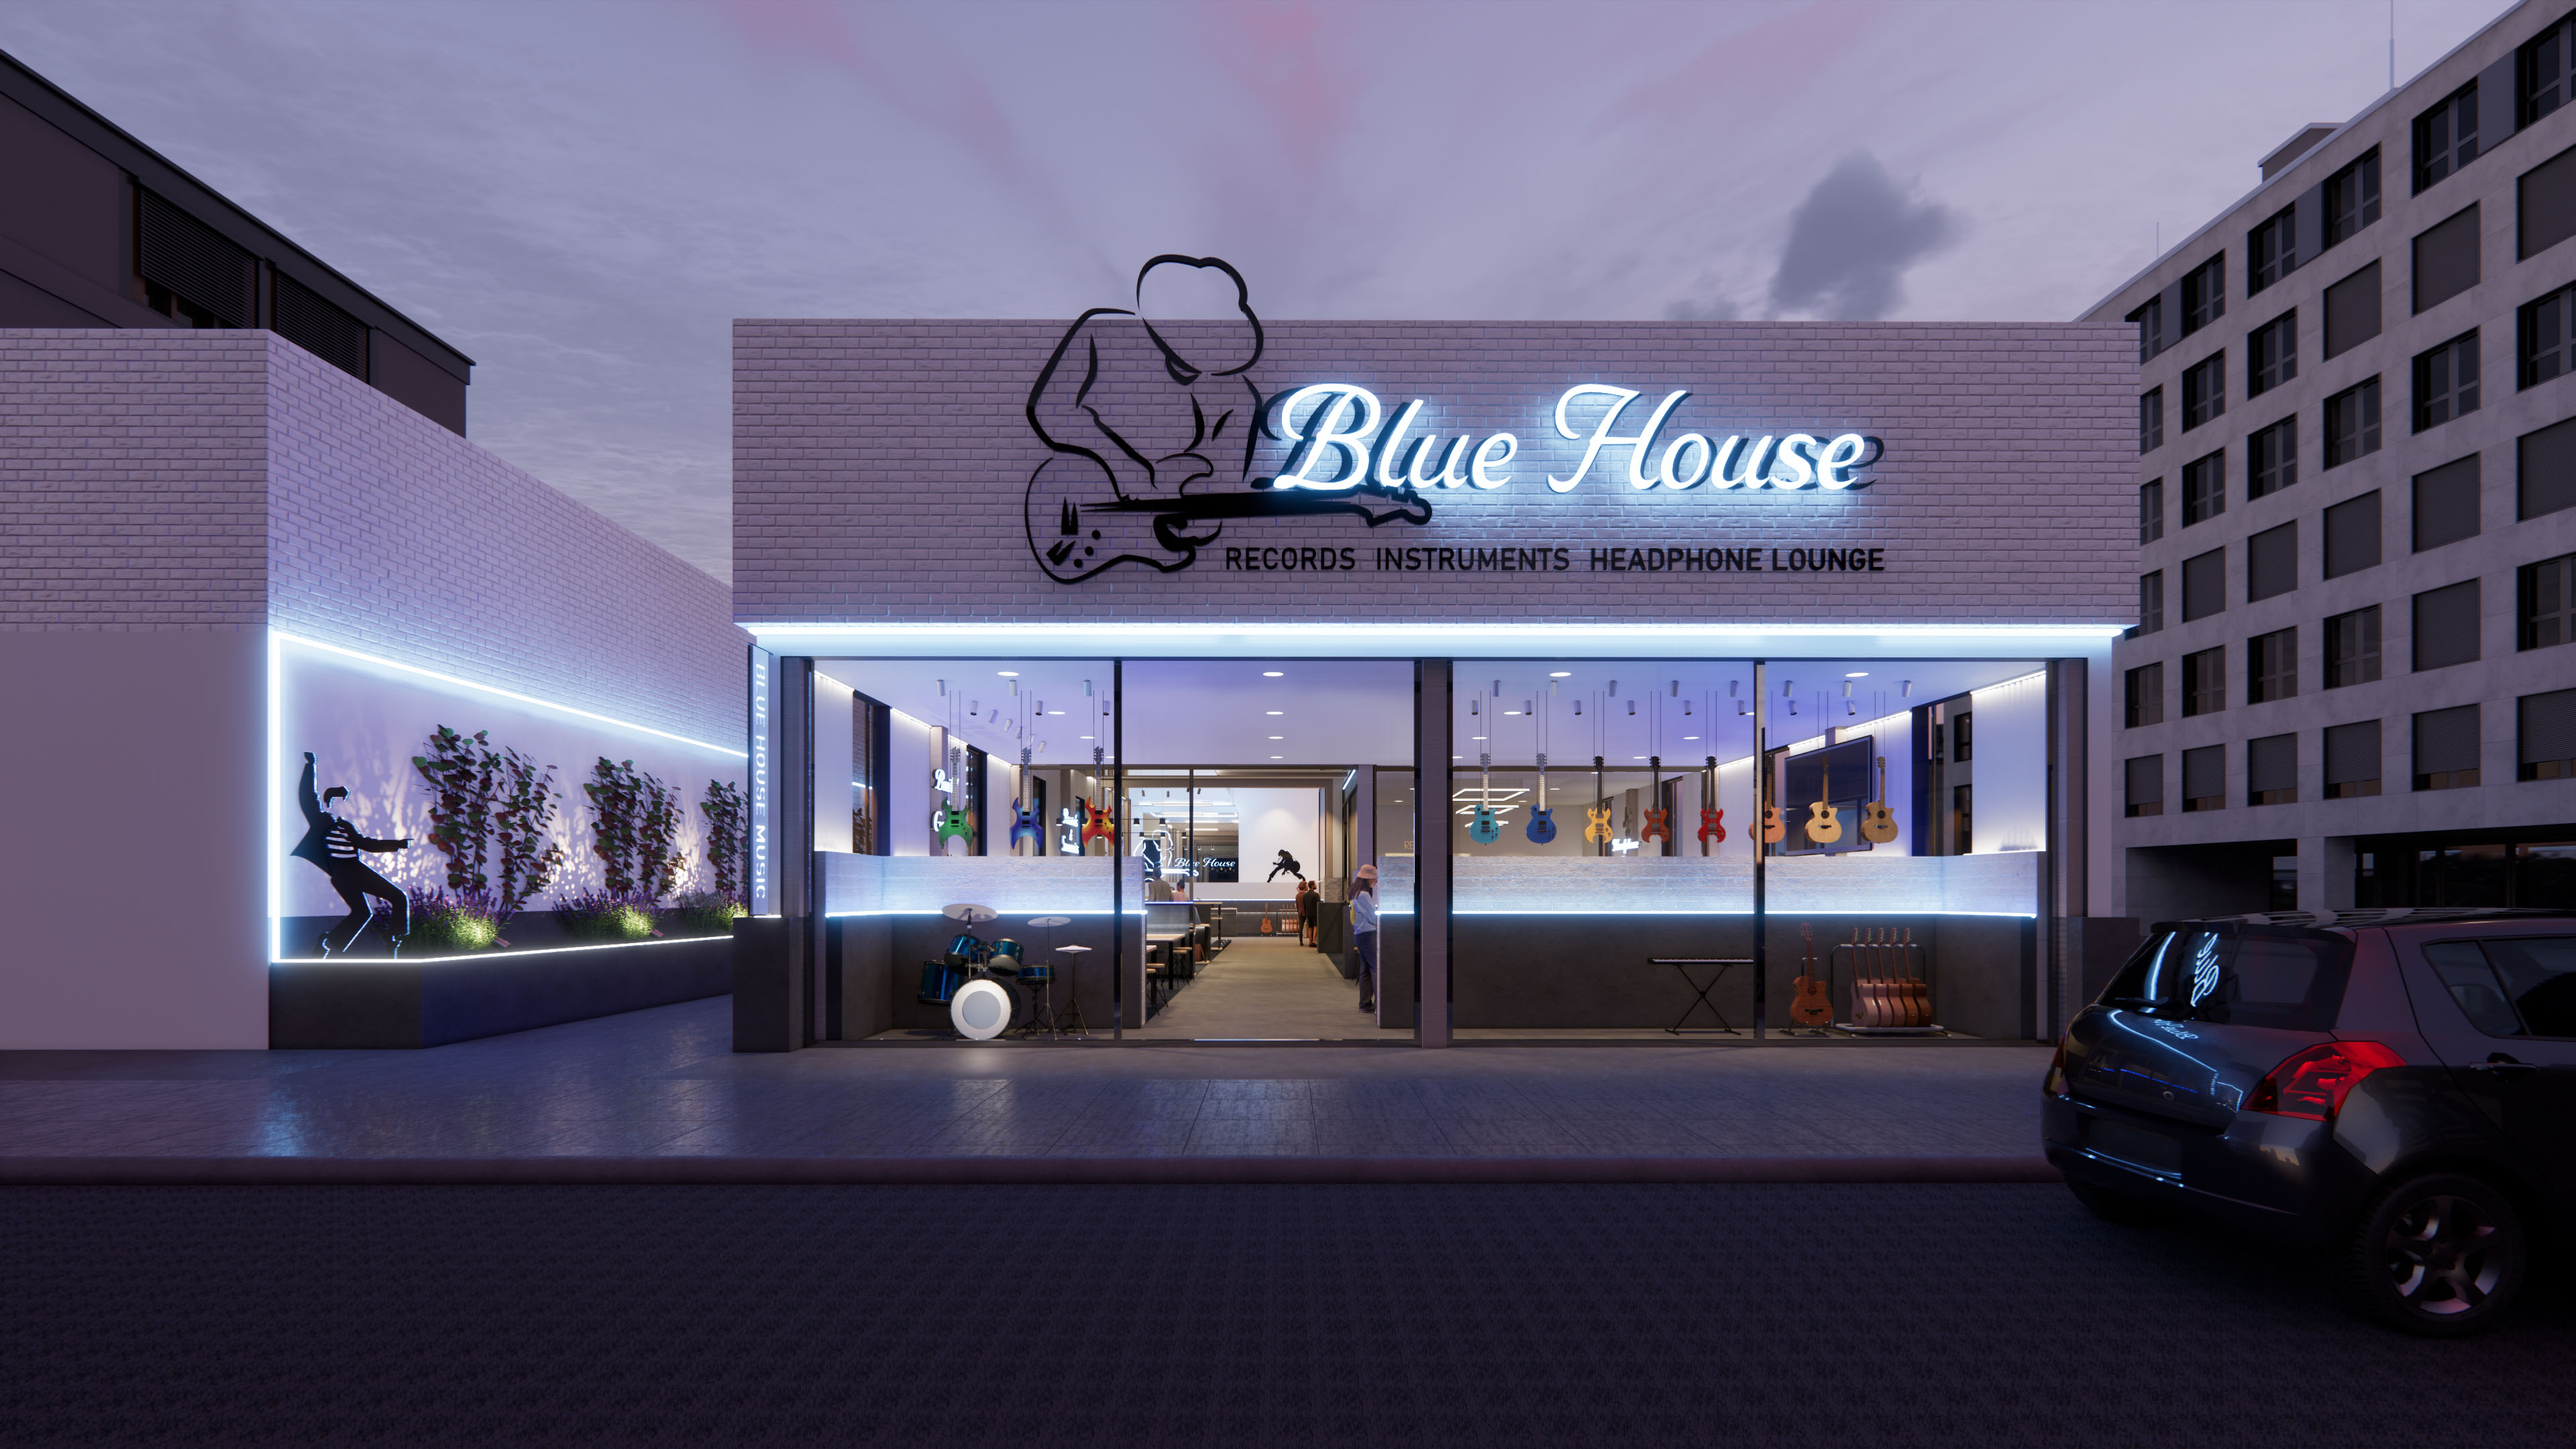 night time exterior view of the Blue House Music store with a neon sign